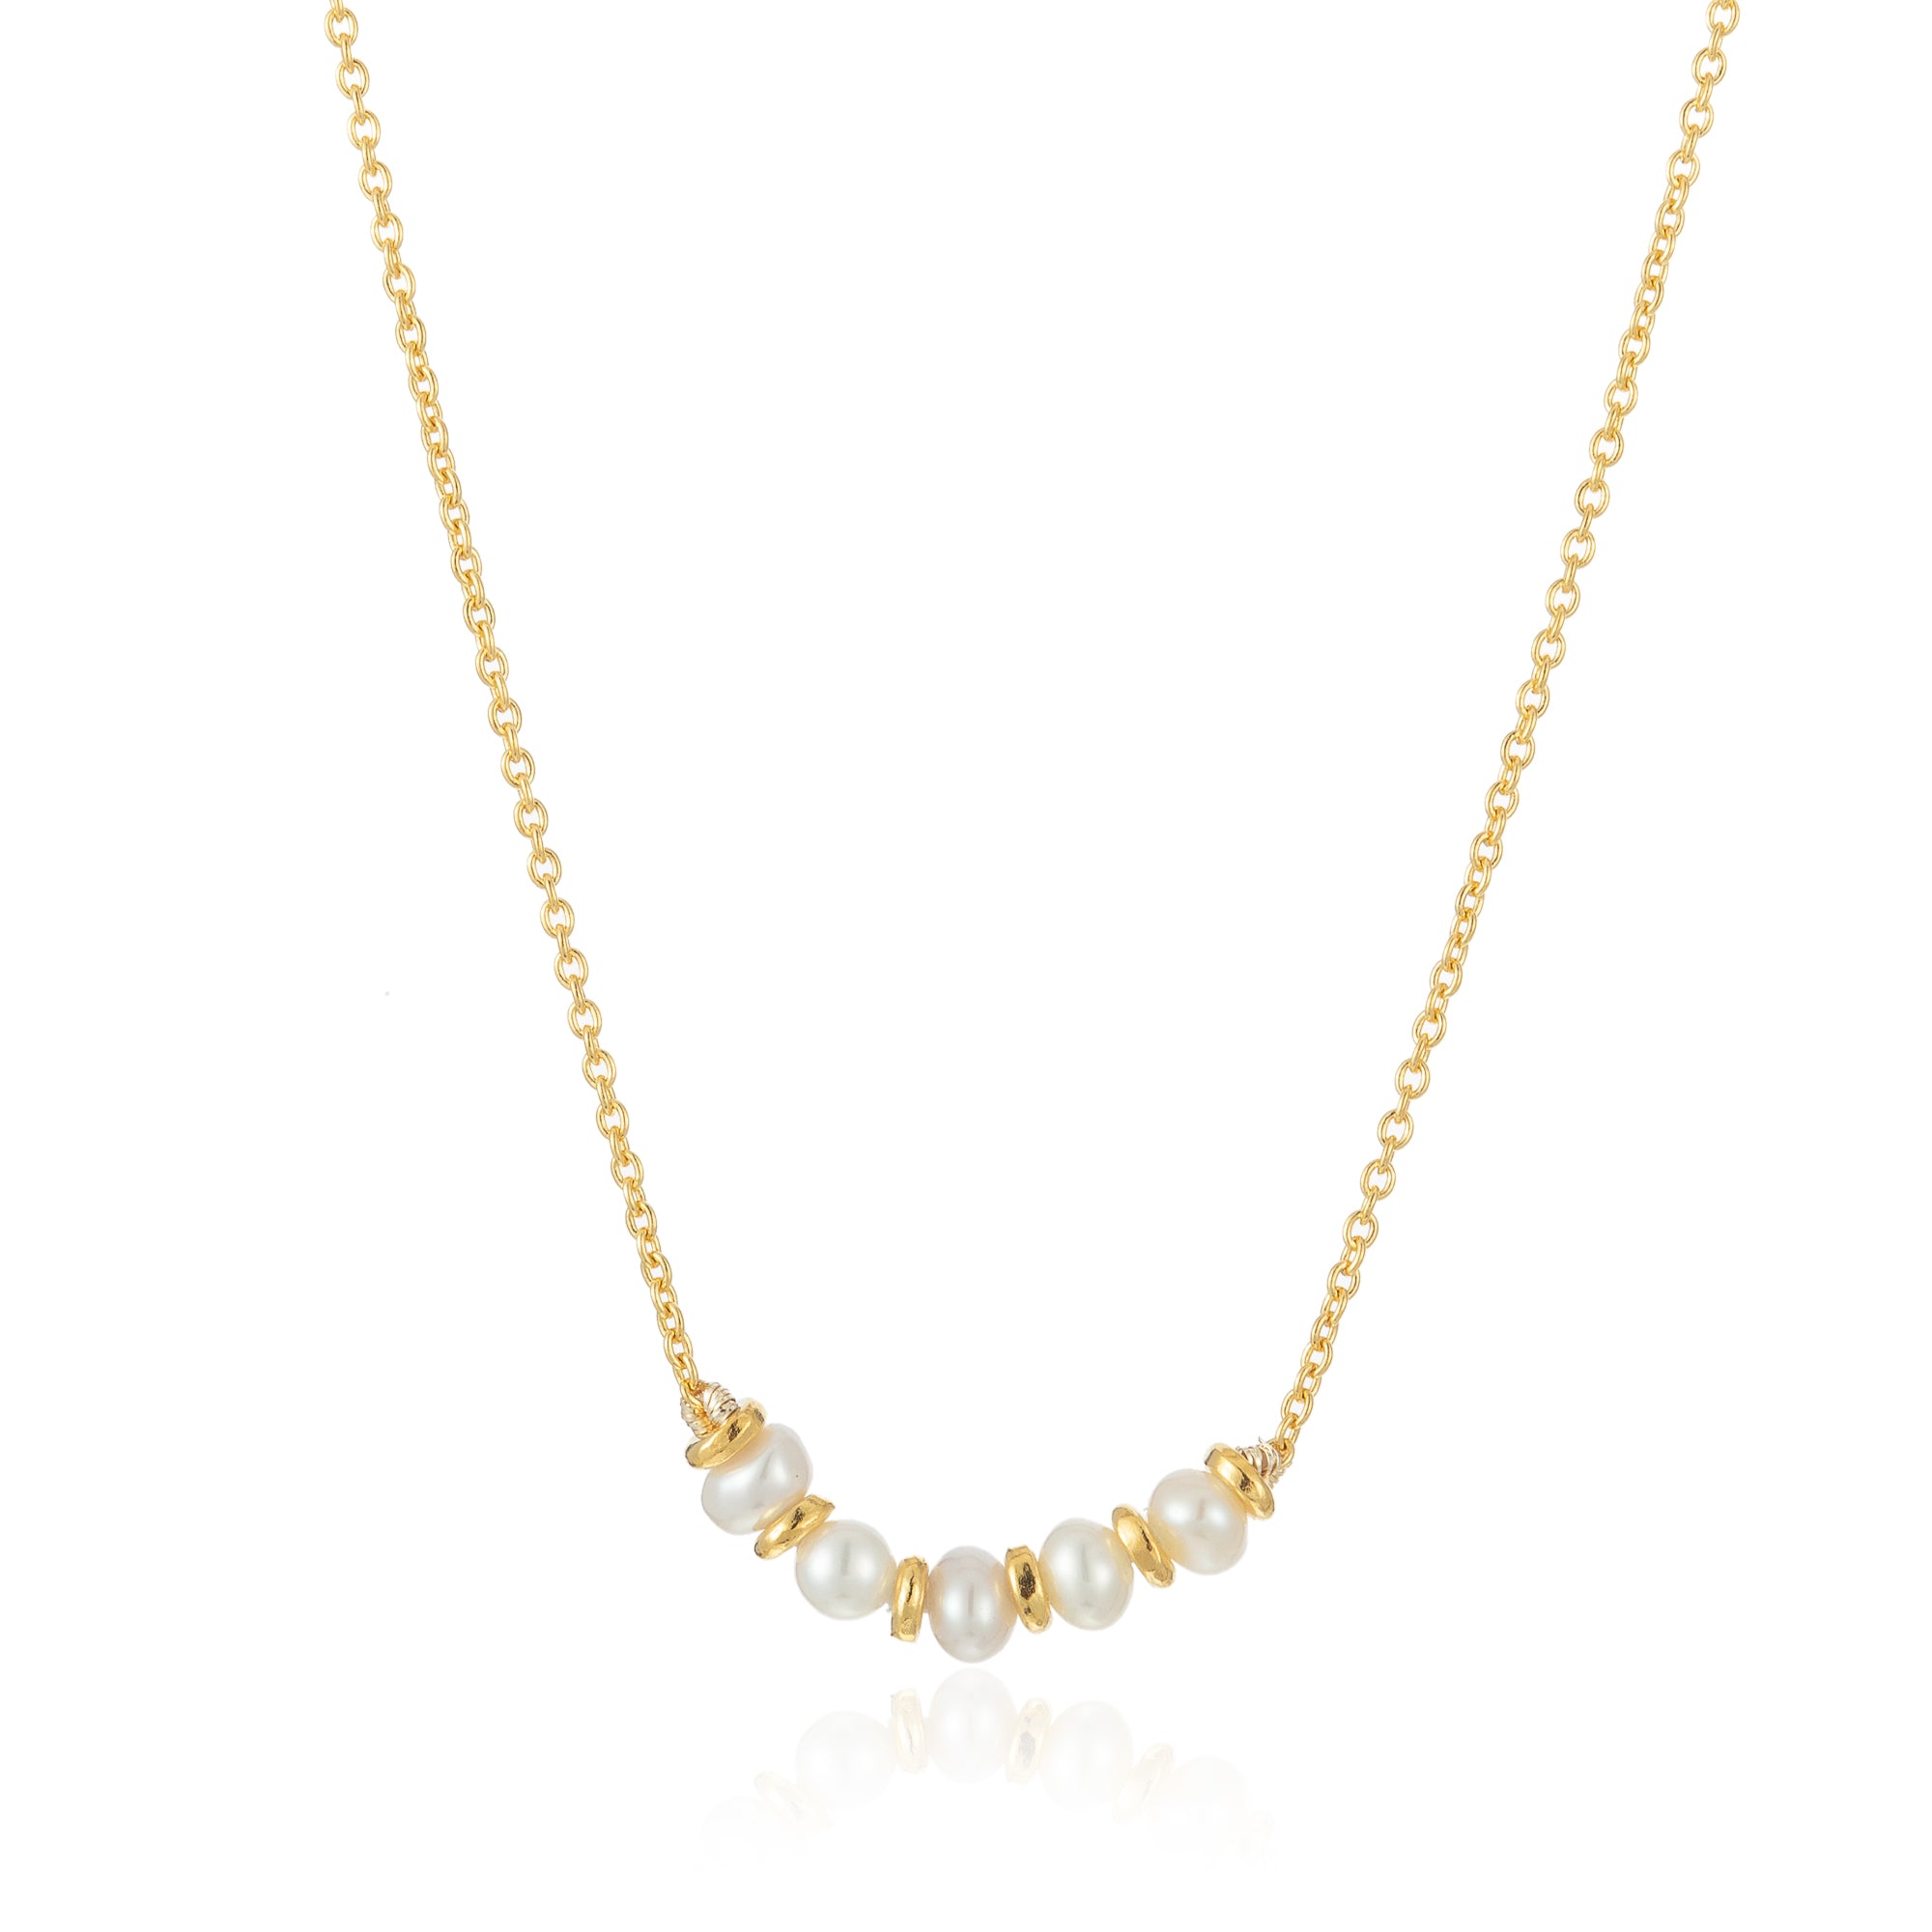 CARA 925 EVERLY Necklace